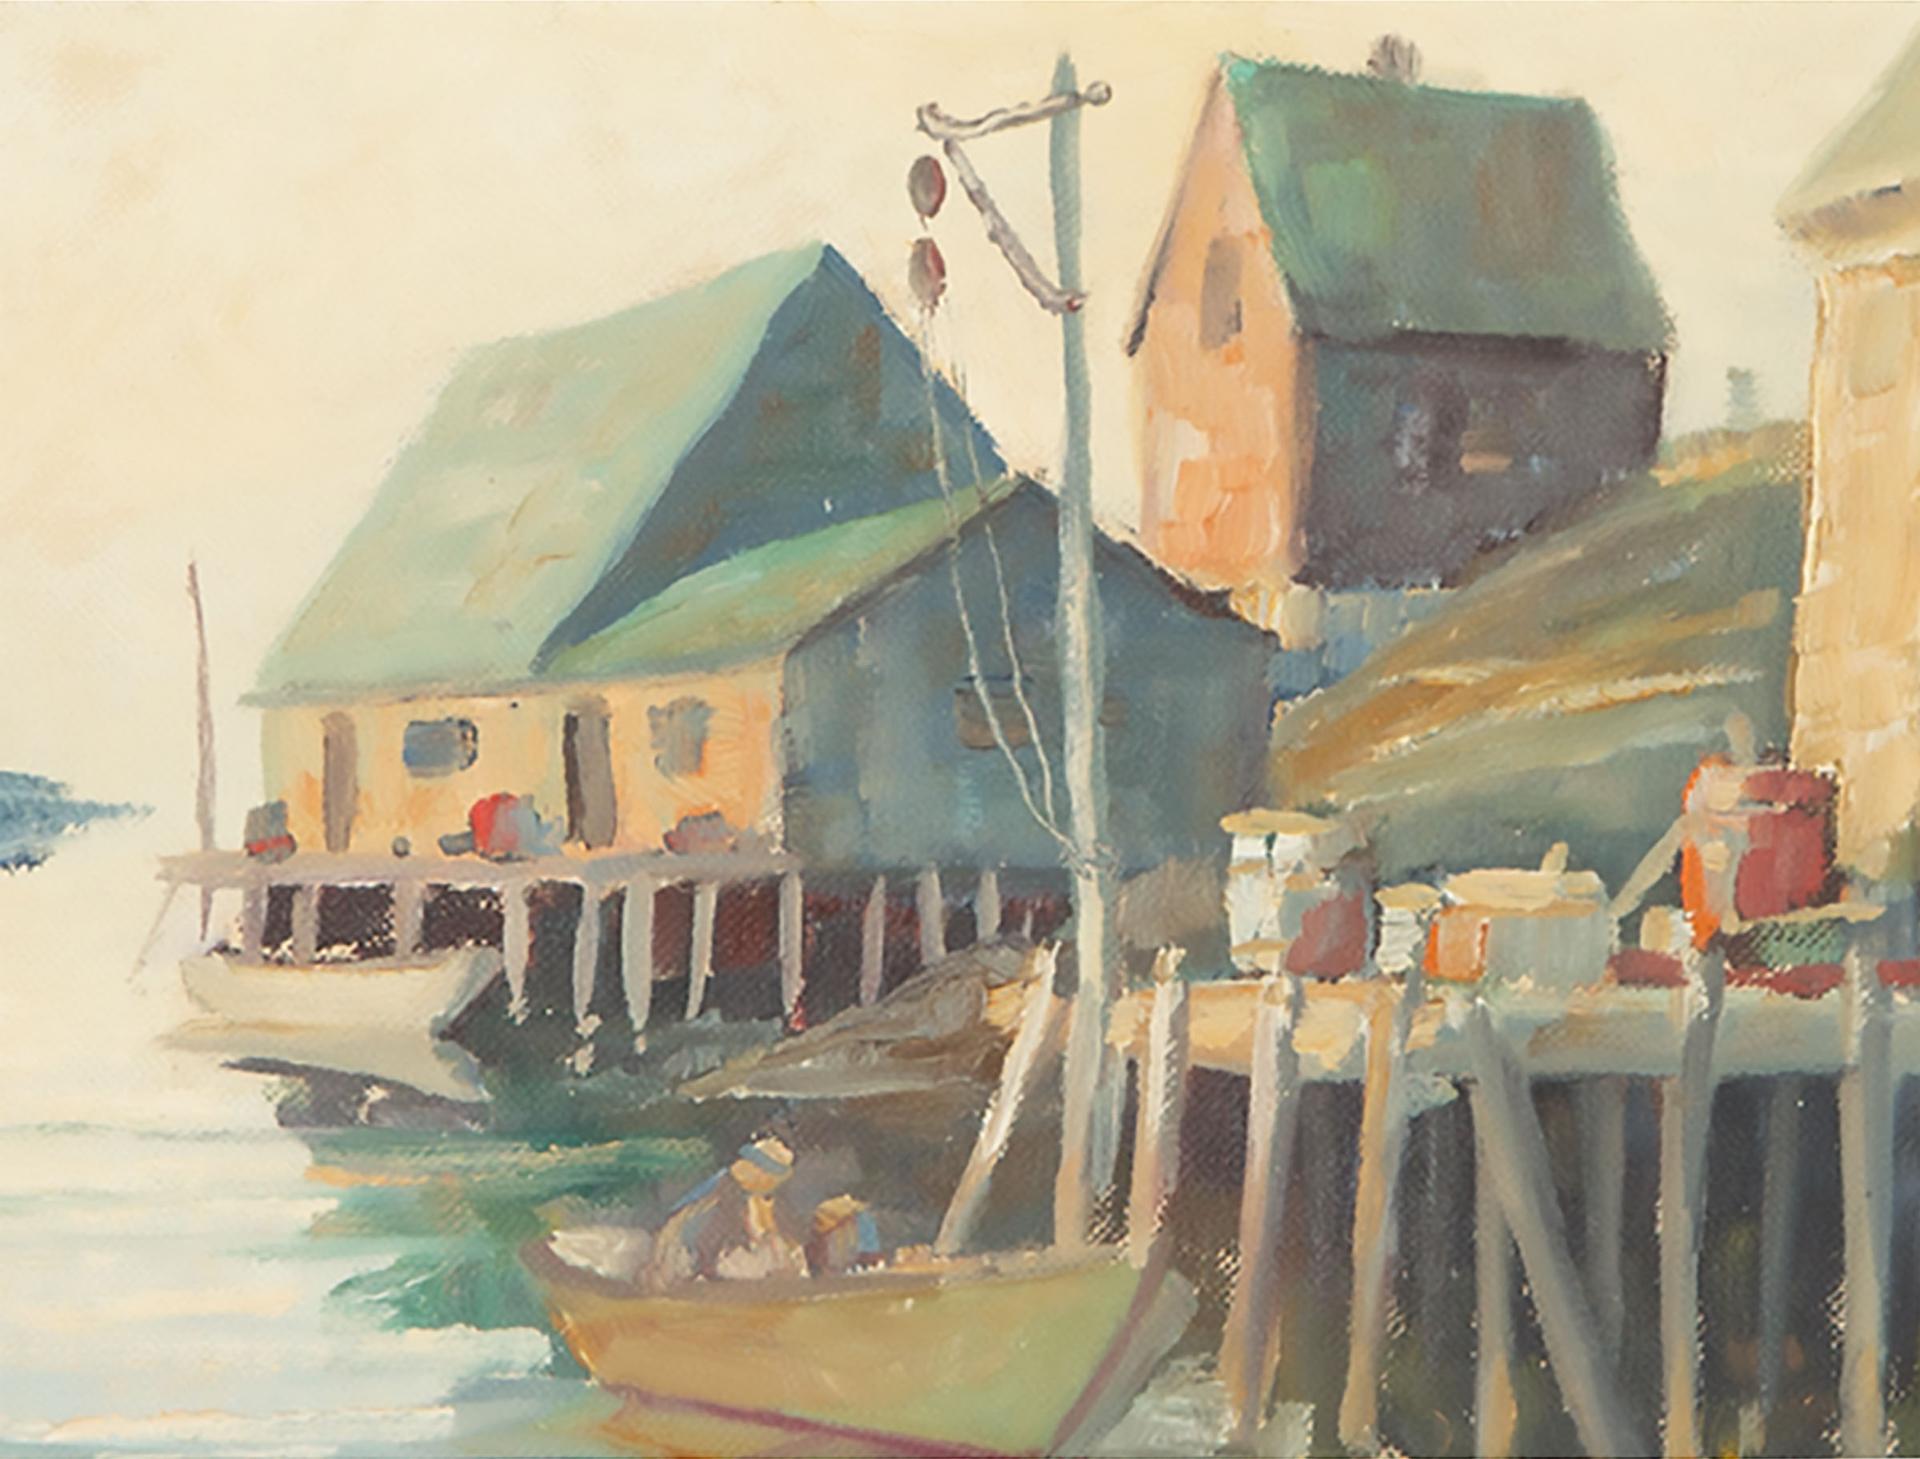 William Edward de Garthe (1907-1983) - Afternoon, Peggy's Cove N.S.